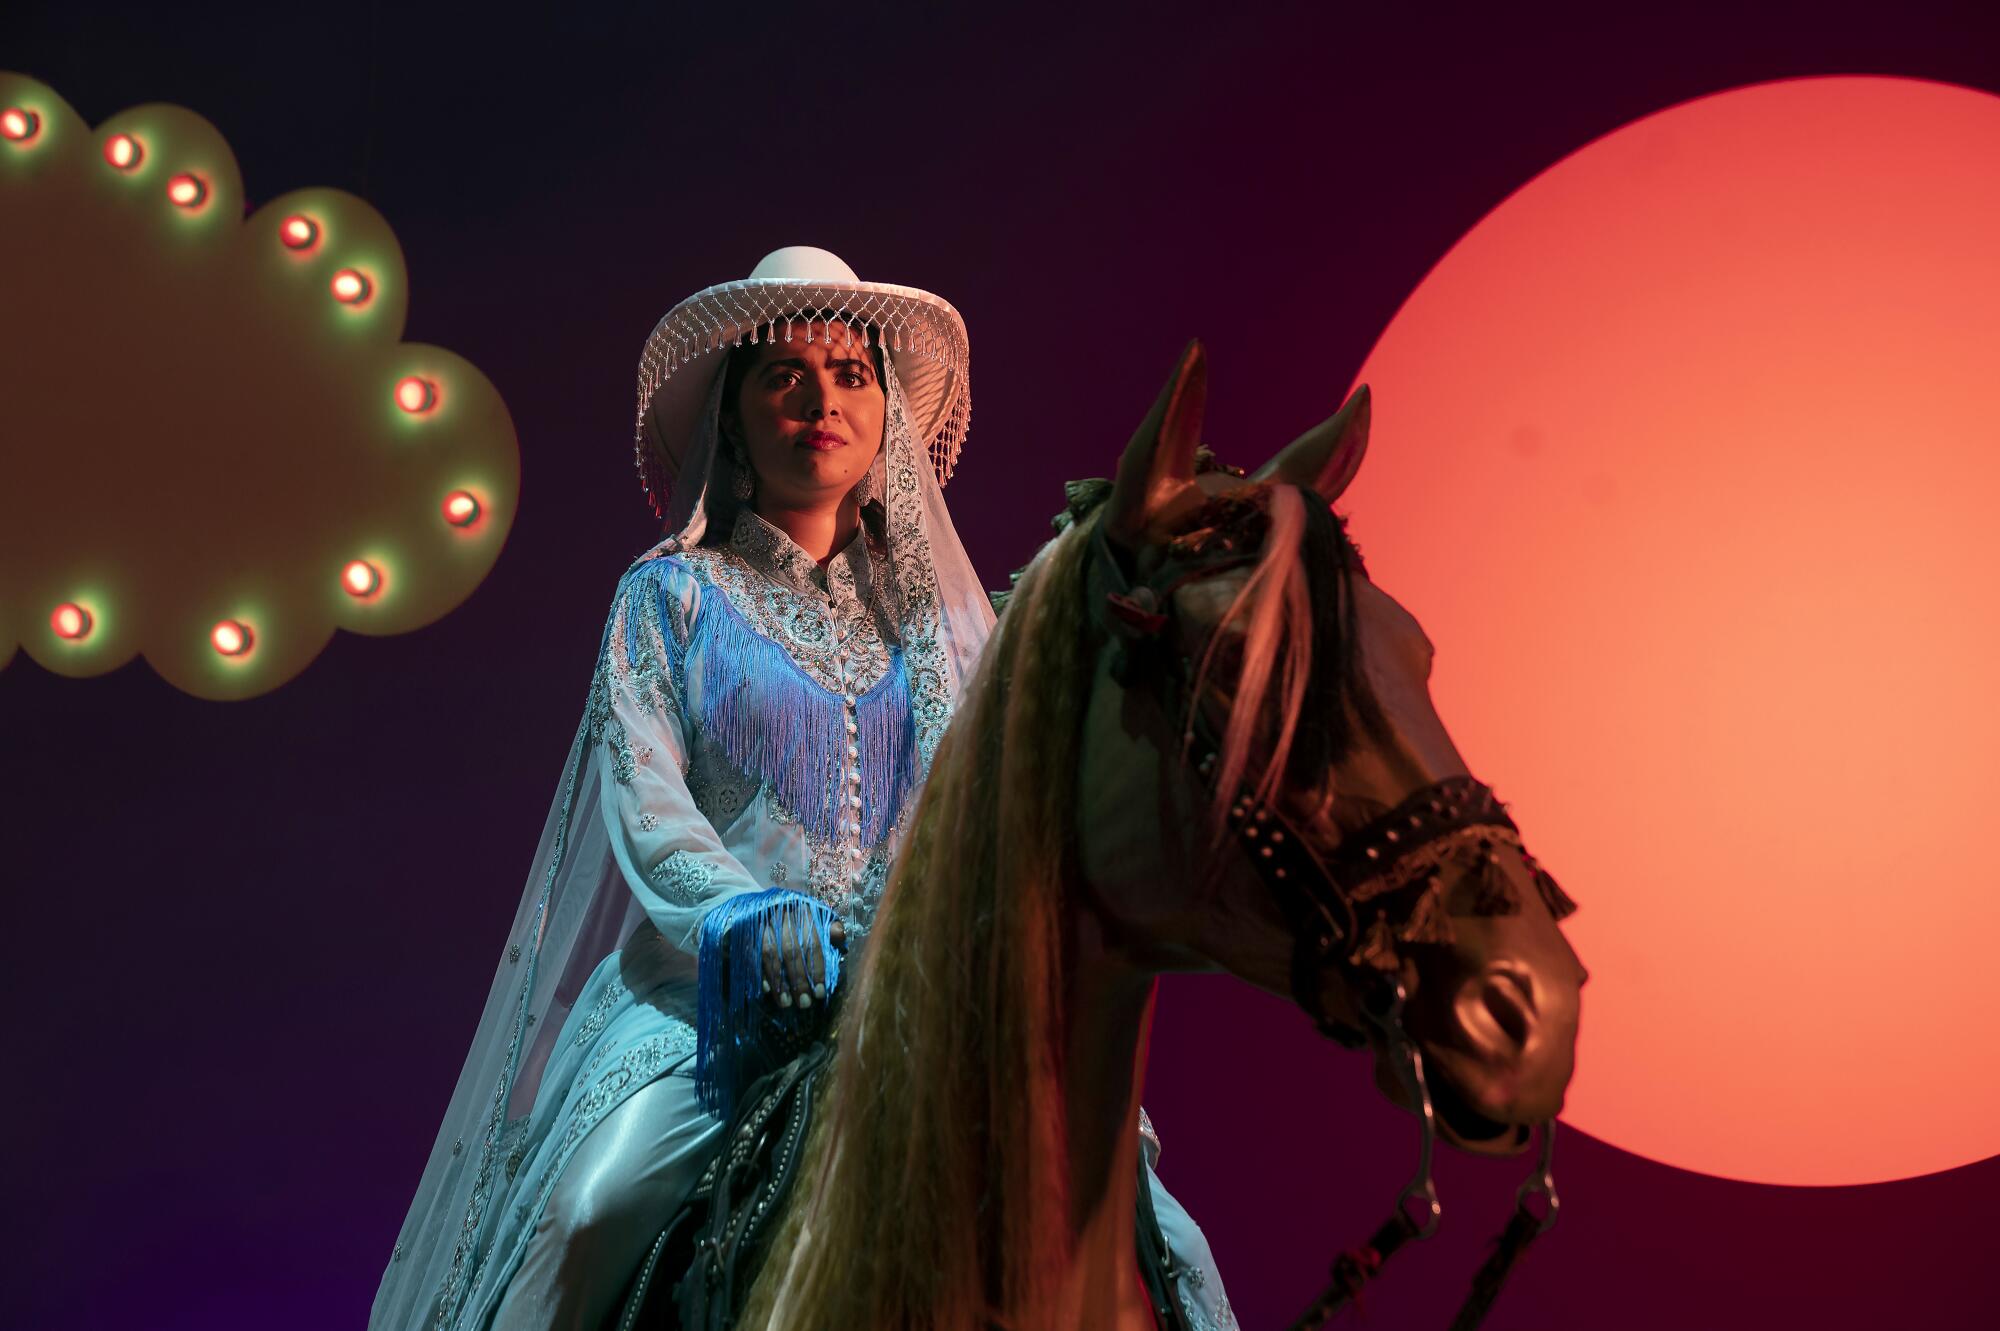 Malala Yousafzai sitting on top of a brown horse wearing a cowboy shirt and hat with beads hanging down the brim.